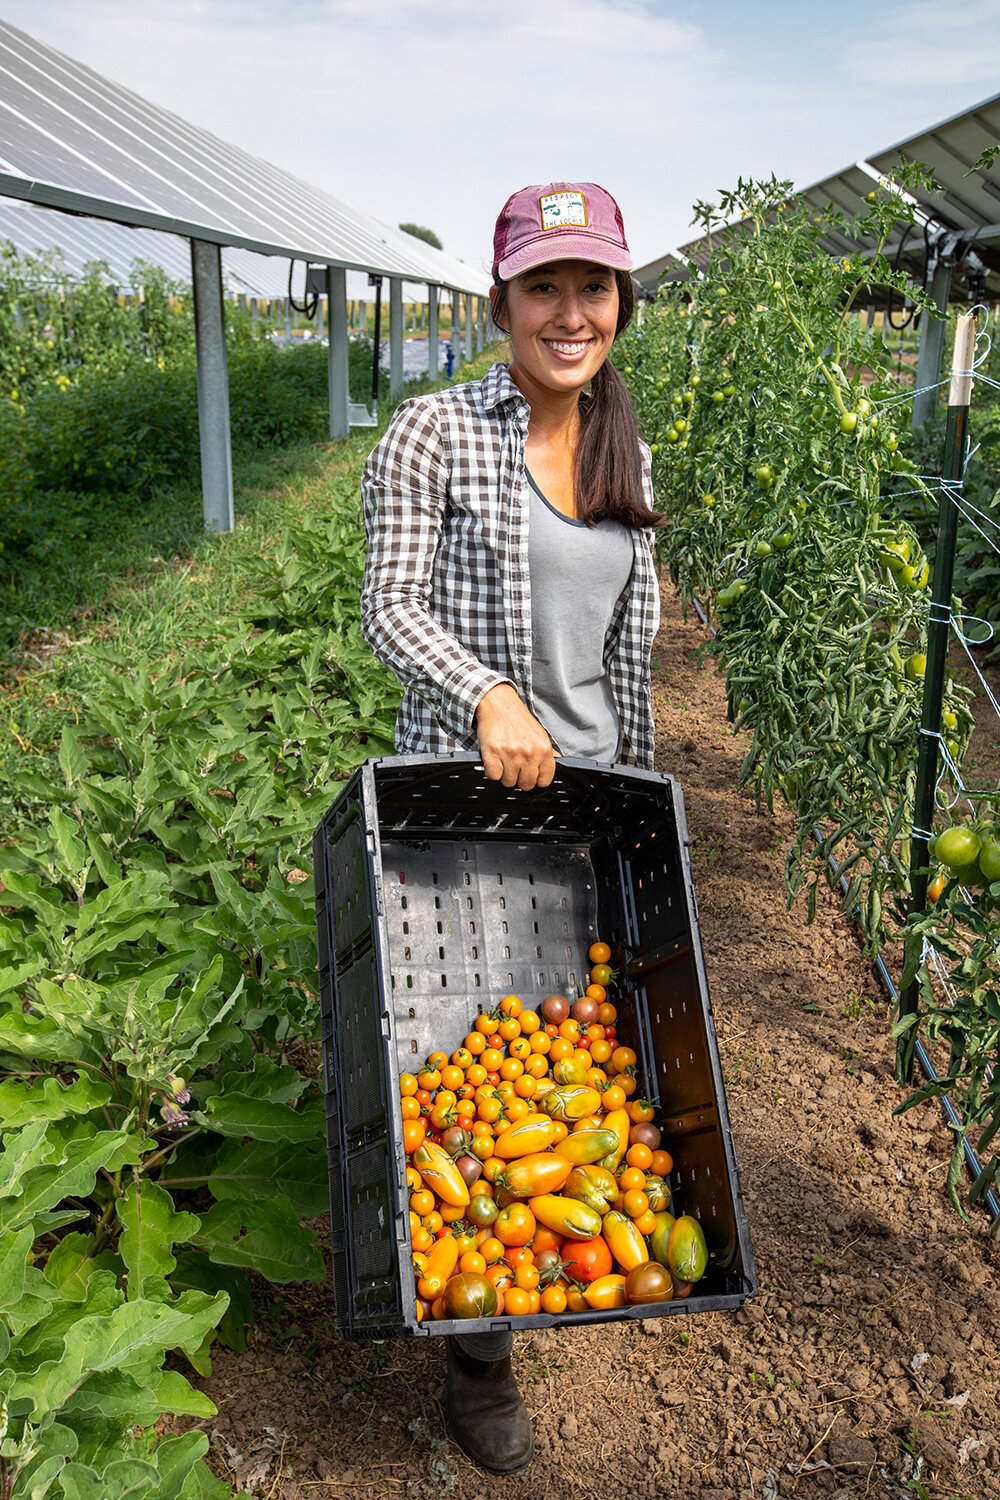 September 1, 2021 - Farmer Brittany Staie of Sprout City Farms, and farm manager at Jack's Solar Garden, picks tomatoes which have been growing at Jack’s Solar Garden in Longmont, Colo. Jack’s is a 1.2-MW, five-acre community solar farm and is the largest agrivoltaic research project in the U.S. The solar project was designed and built by Namasté Solar. (Photo by Werner Slocum / NREL)